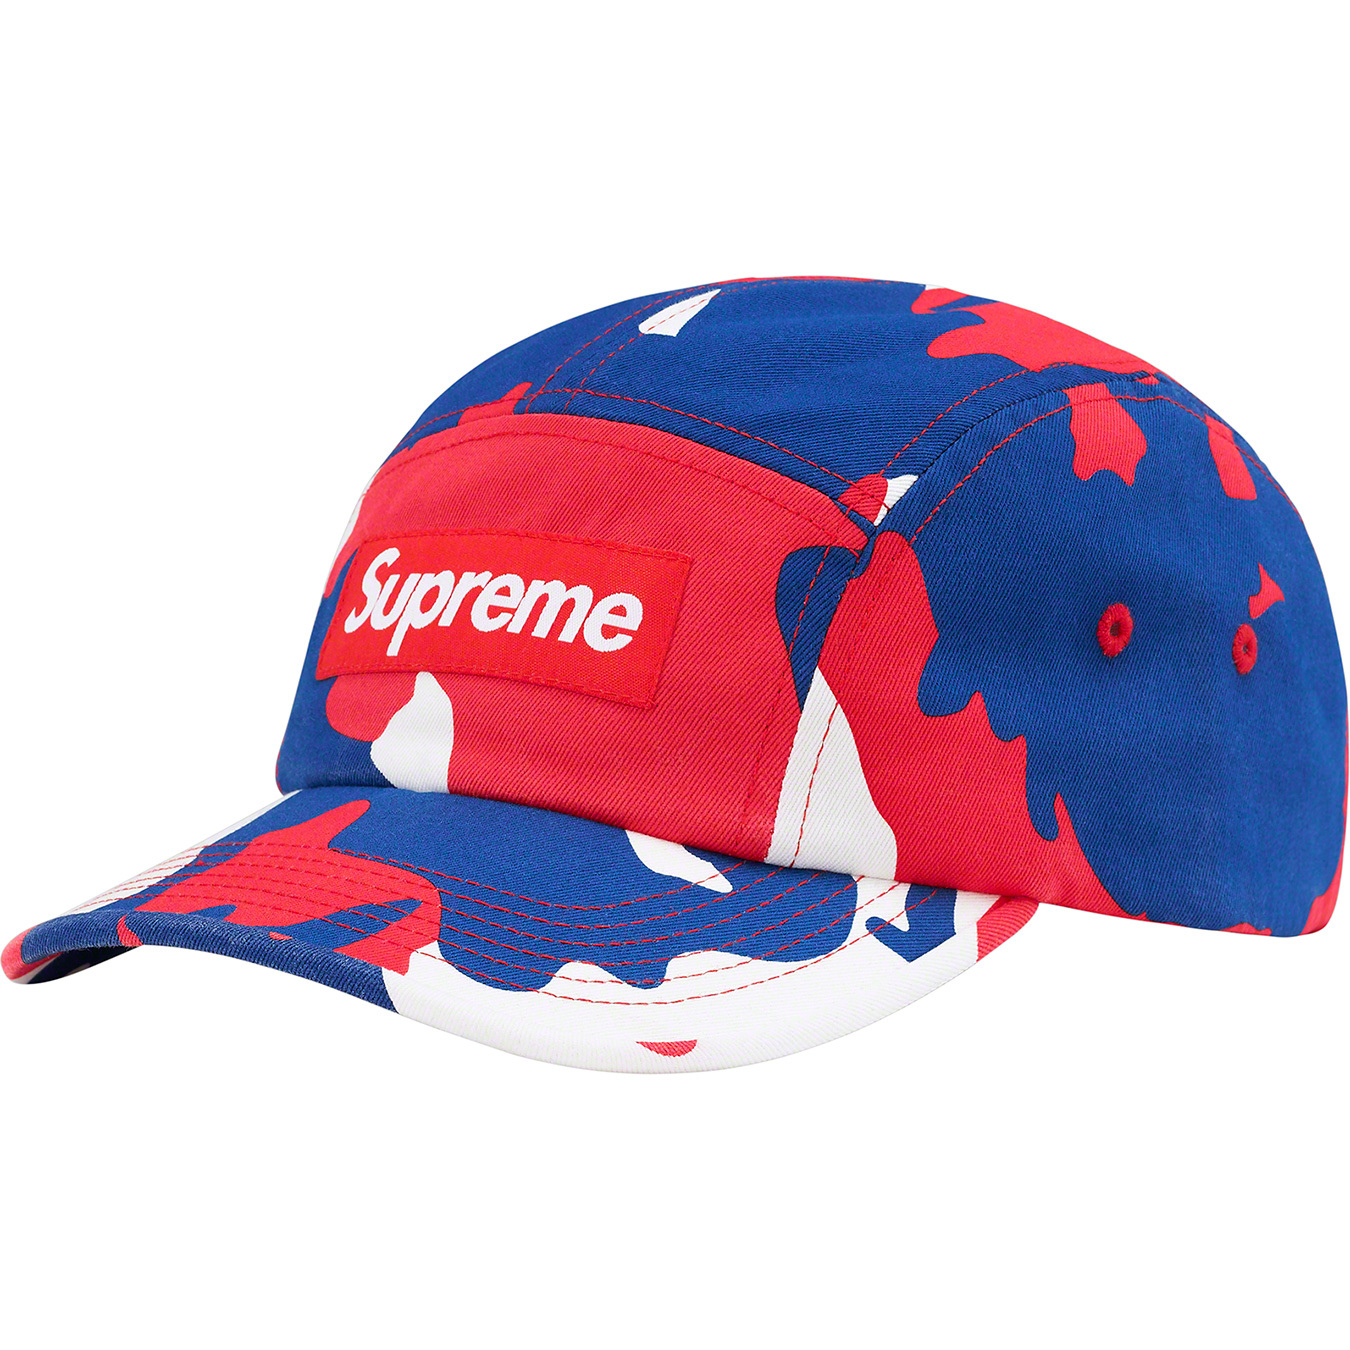 22SS SUPREME Washed Chino Twill Camp Cap